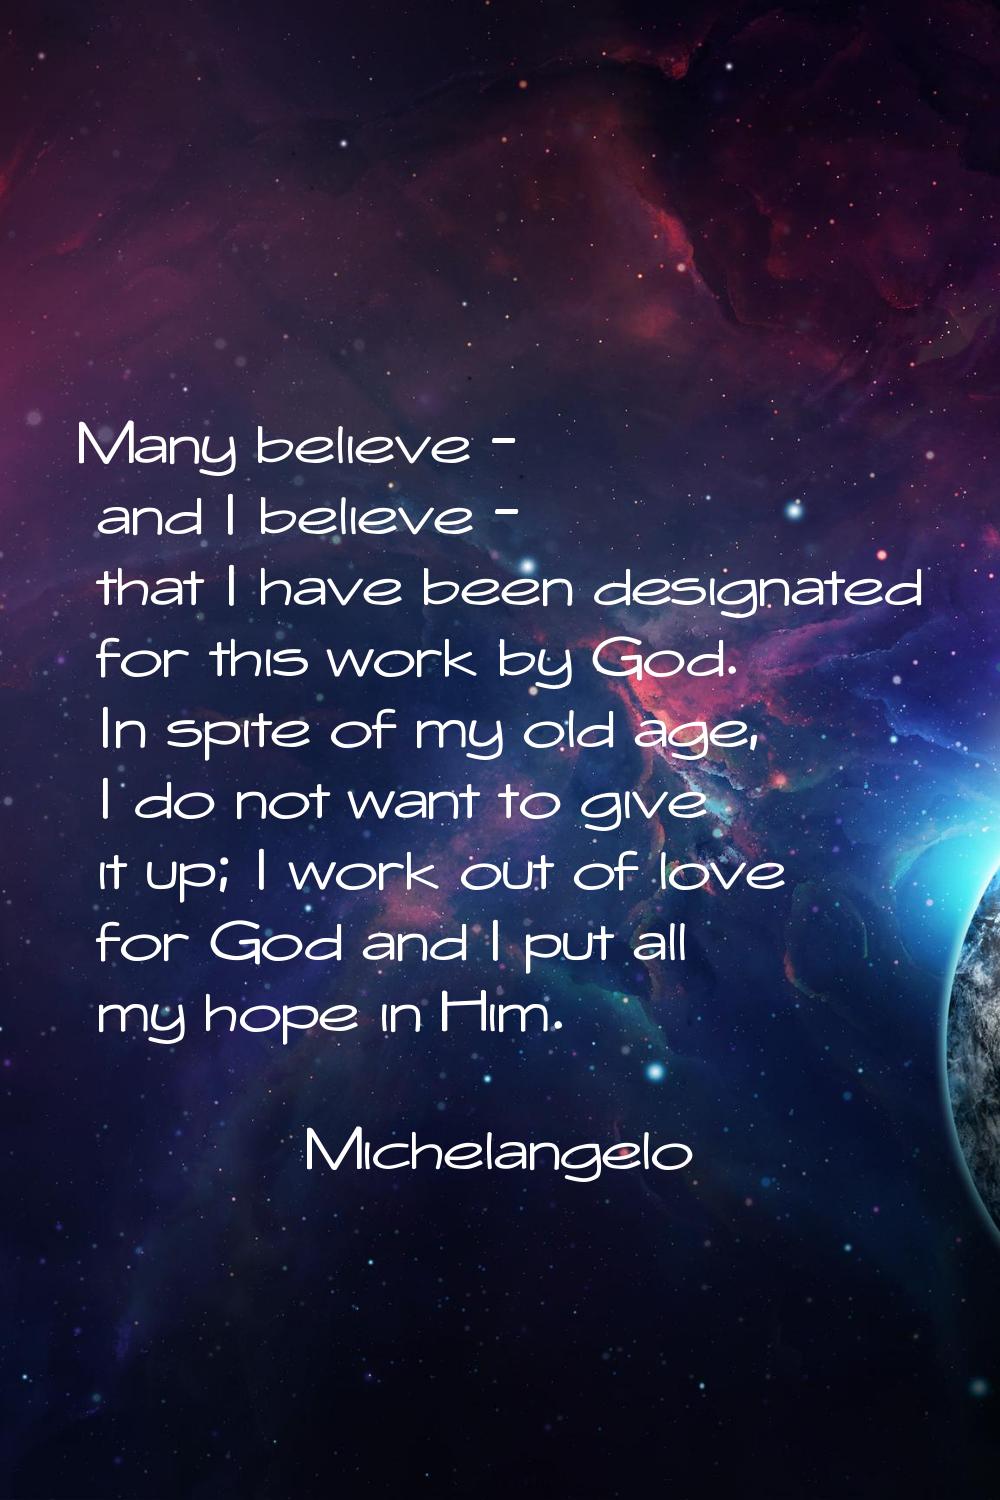 Many believe - and I believe - that I have been designated for this work by God. In spite of my old